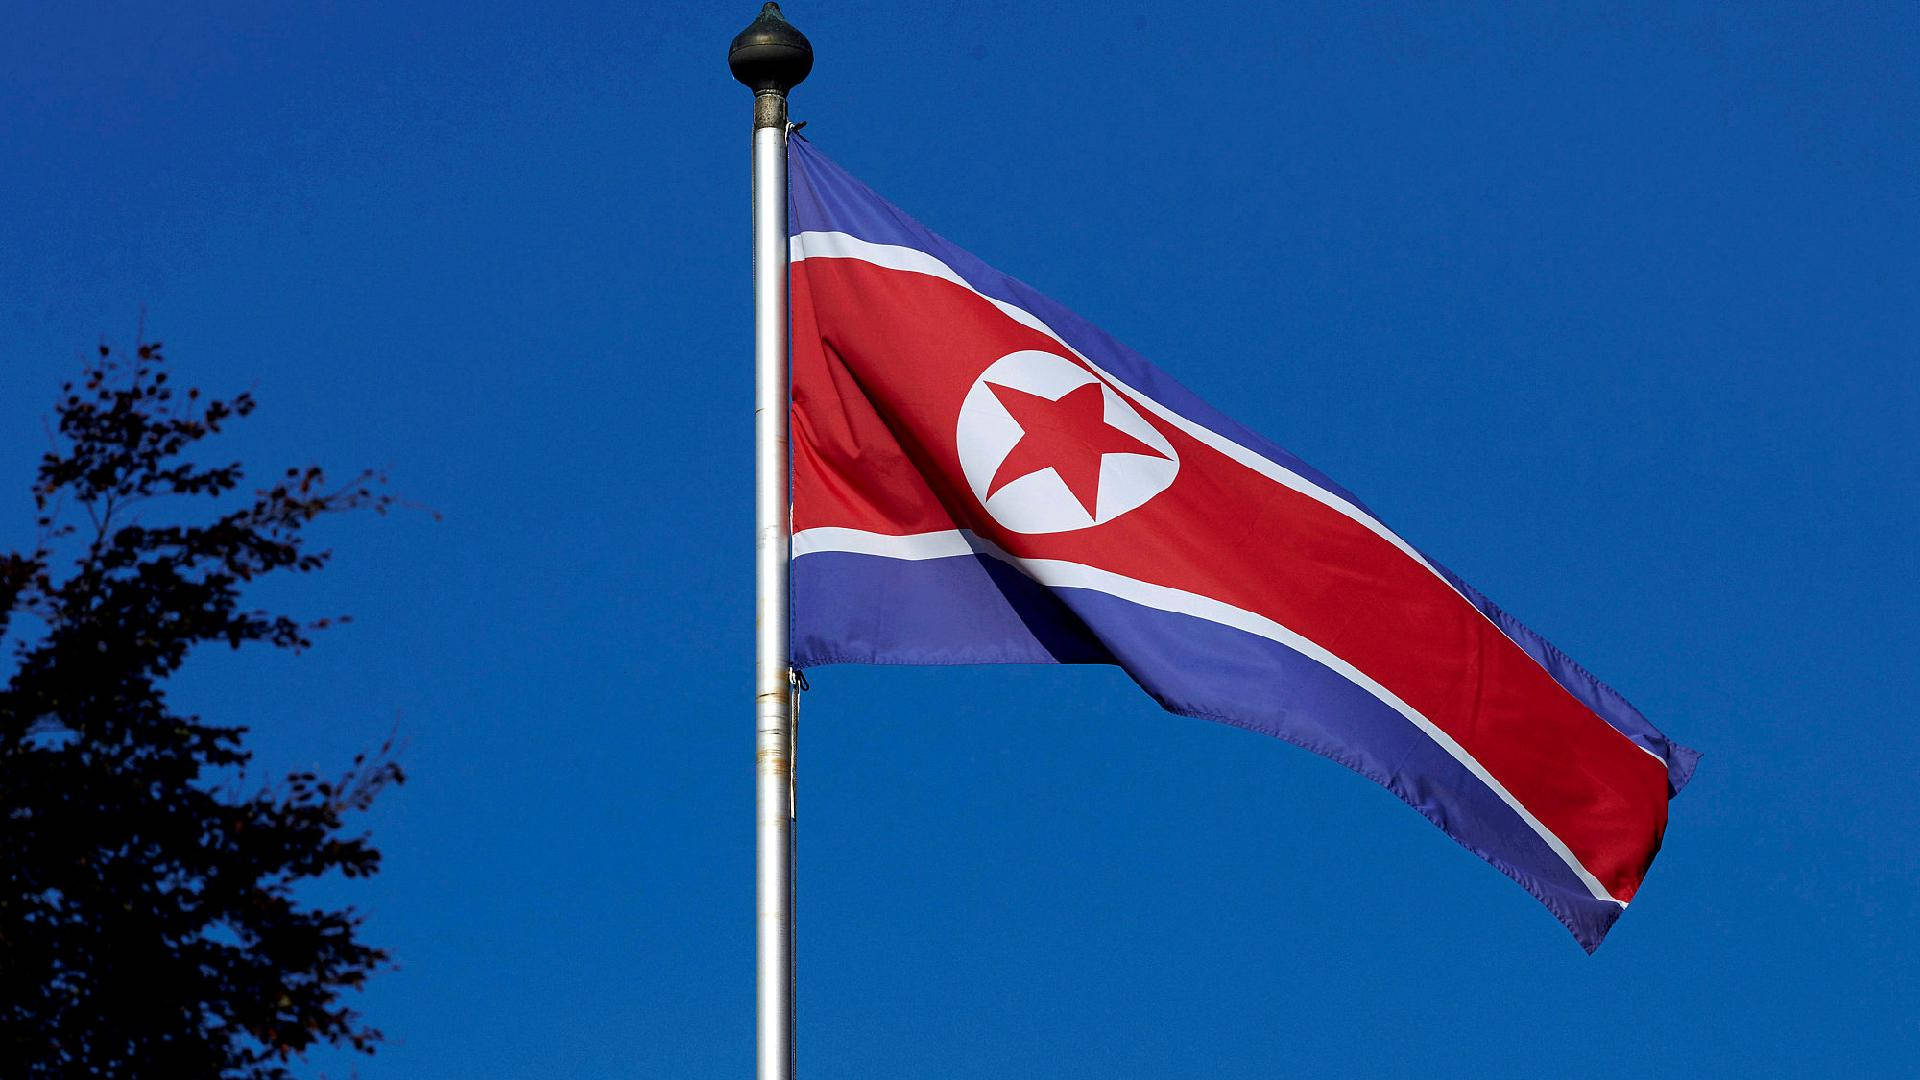 North Korea Flag With Tree Behind Wallpaper